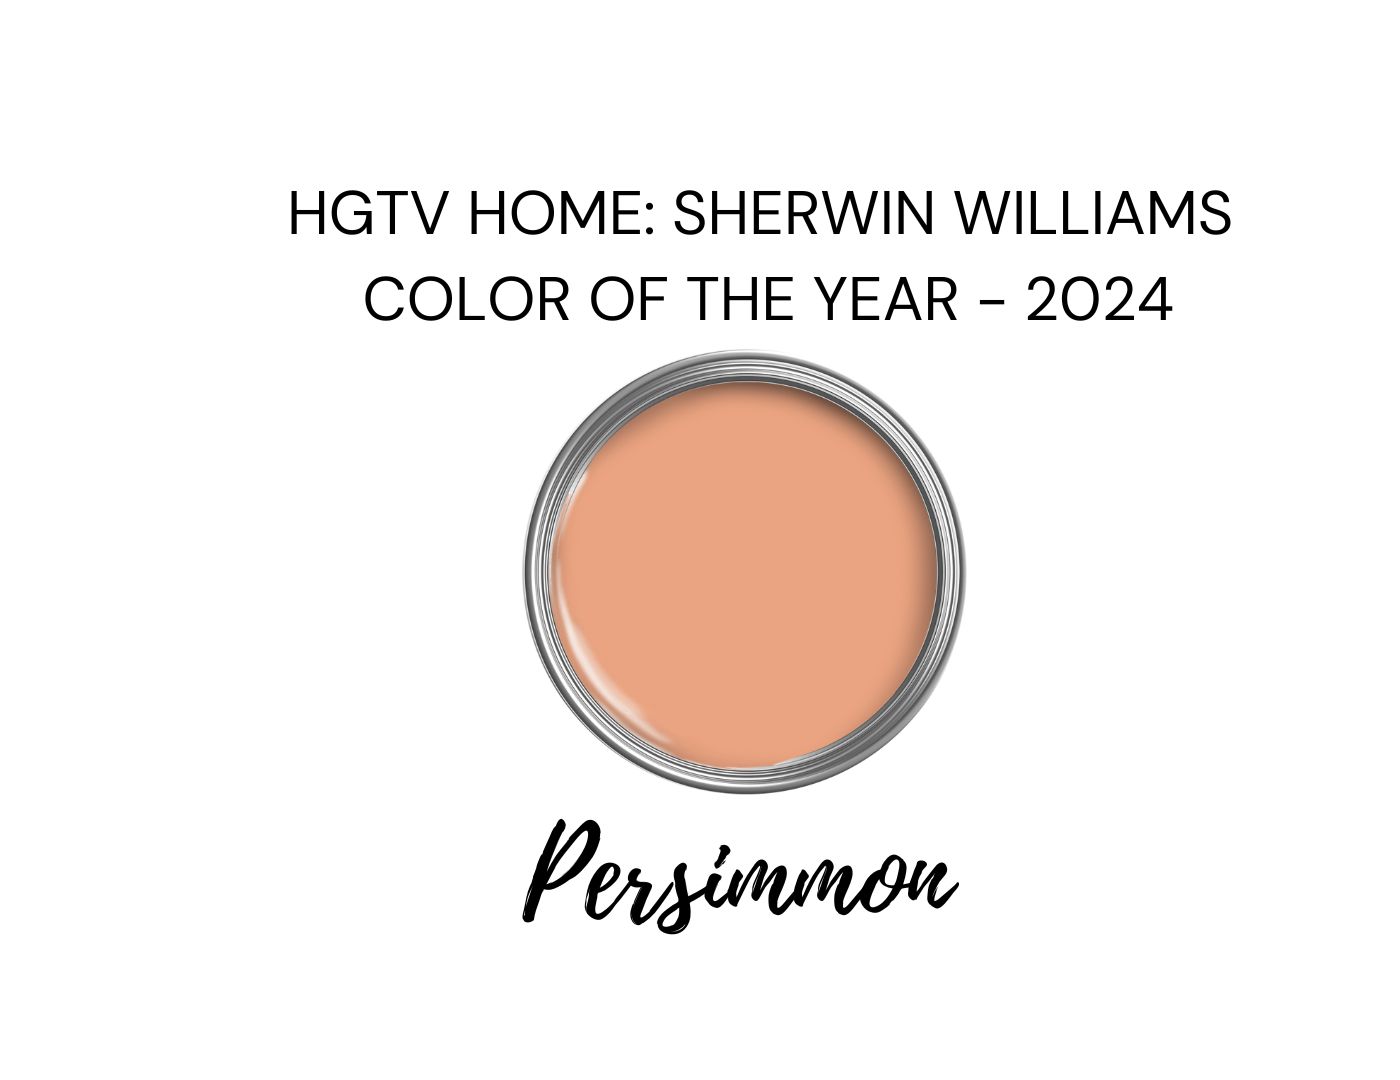 SHERWIN WILLIAMS COLOR OF THE YEAR - 2024 (1)